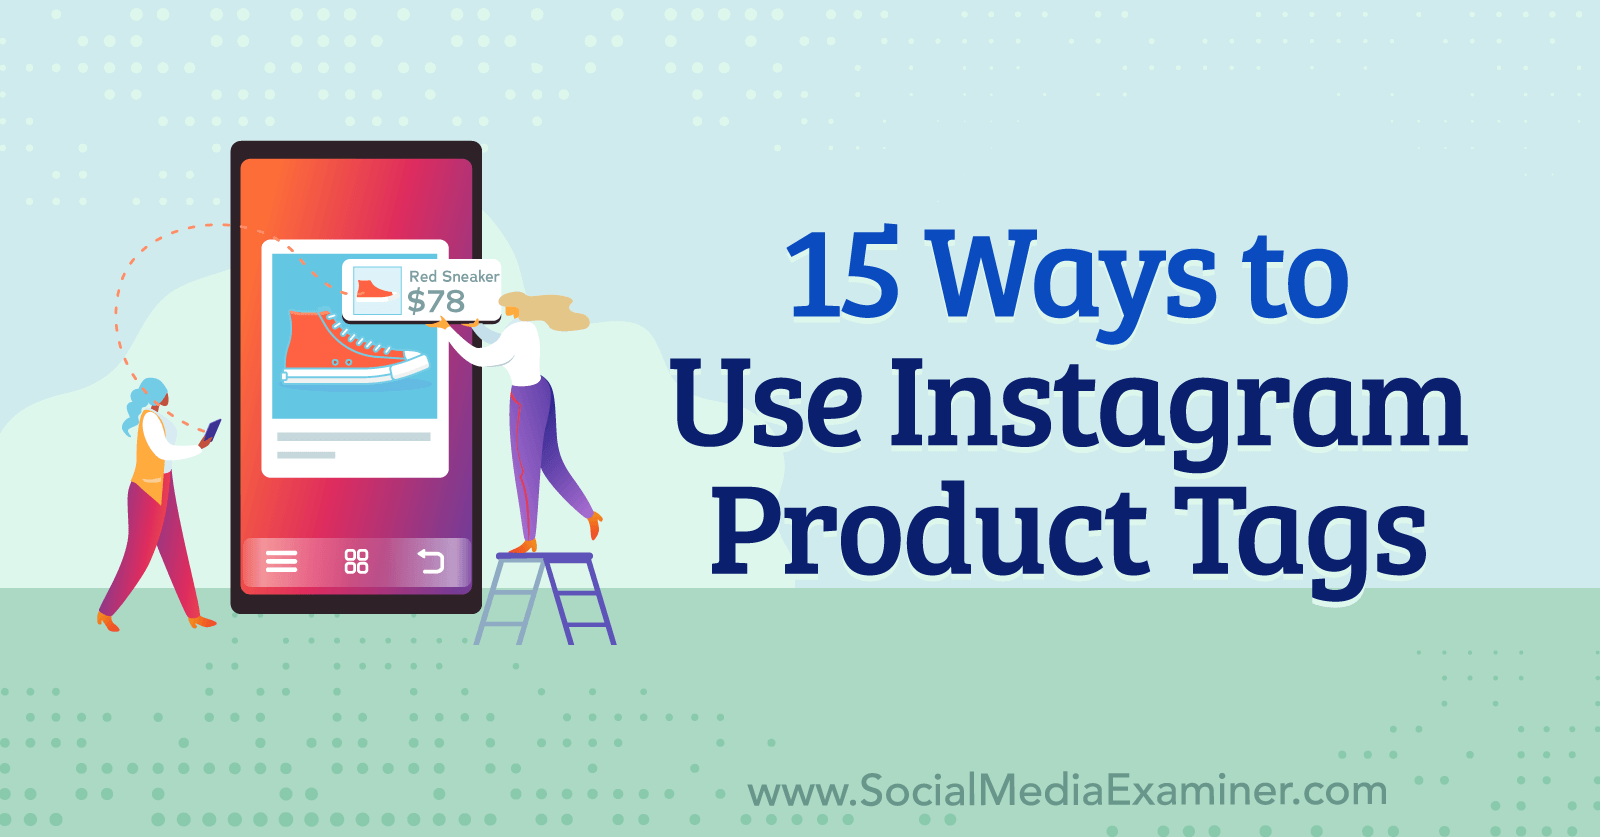 15 Ways to Use Instagram Product Tags by Anna Sonnenberg on Social Media Examiner.